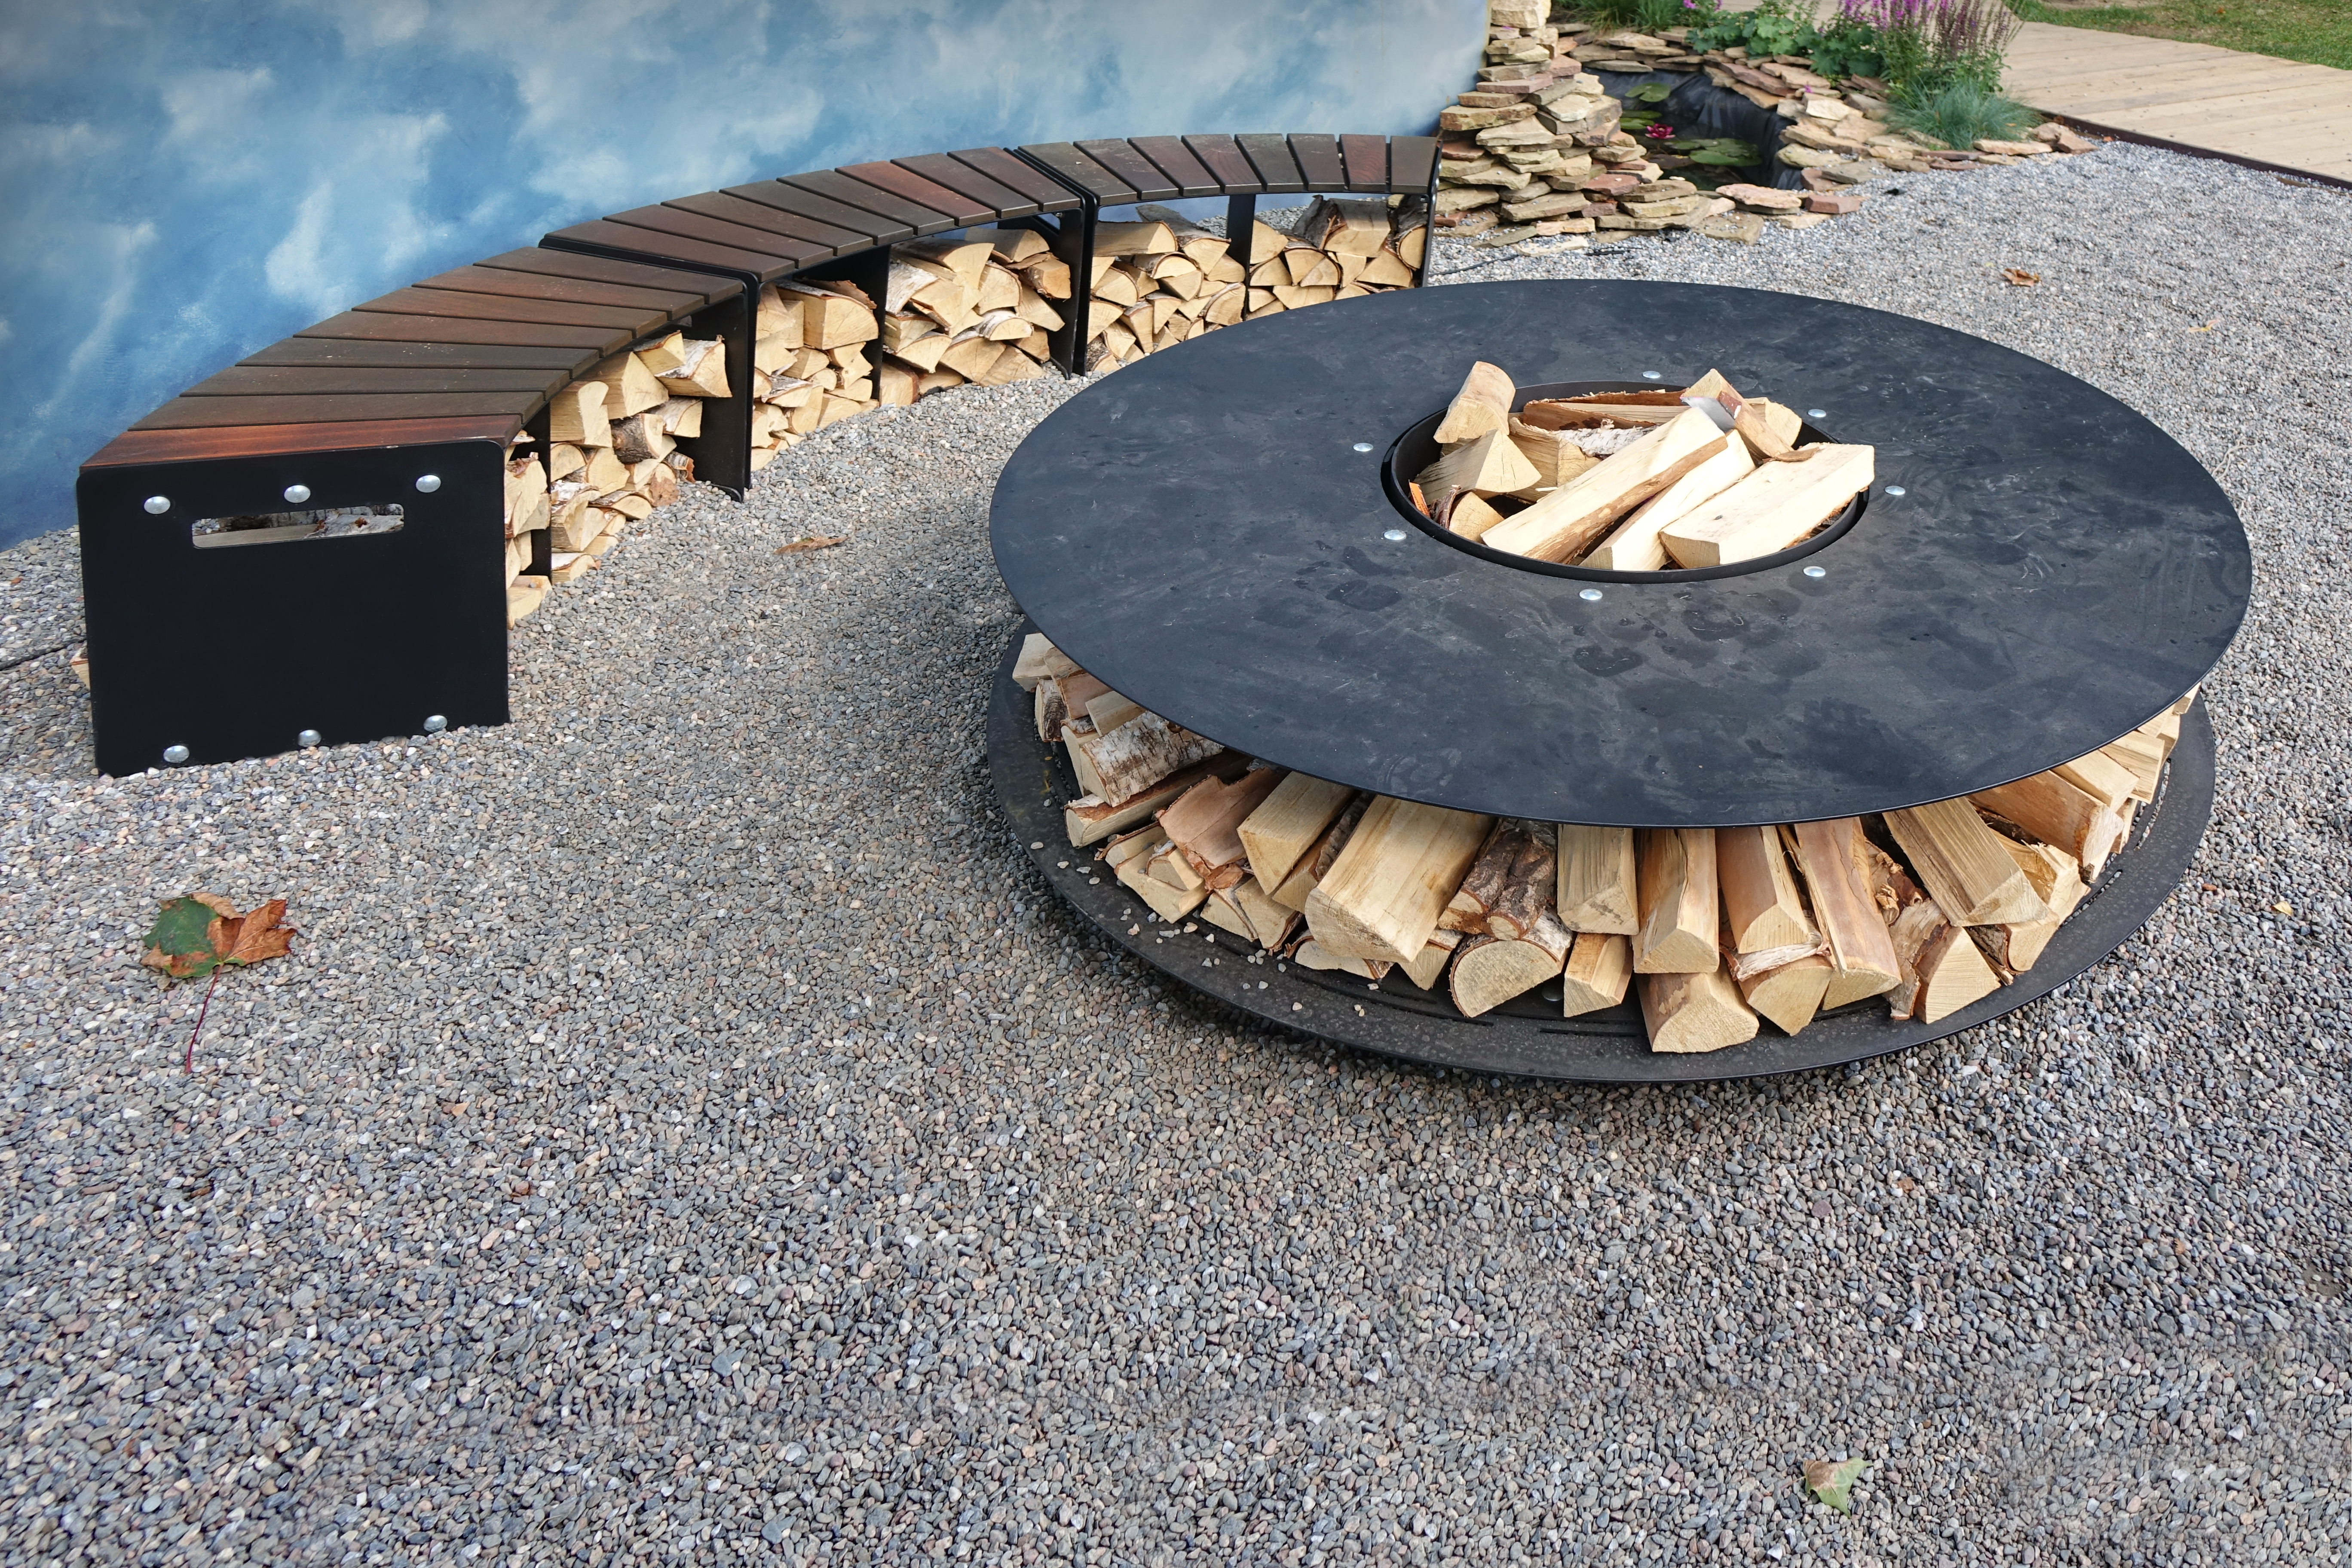 Pea gravel patio with a fire pit and log holder. | Source: Shutterstock